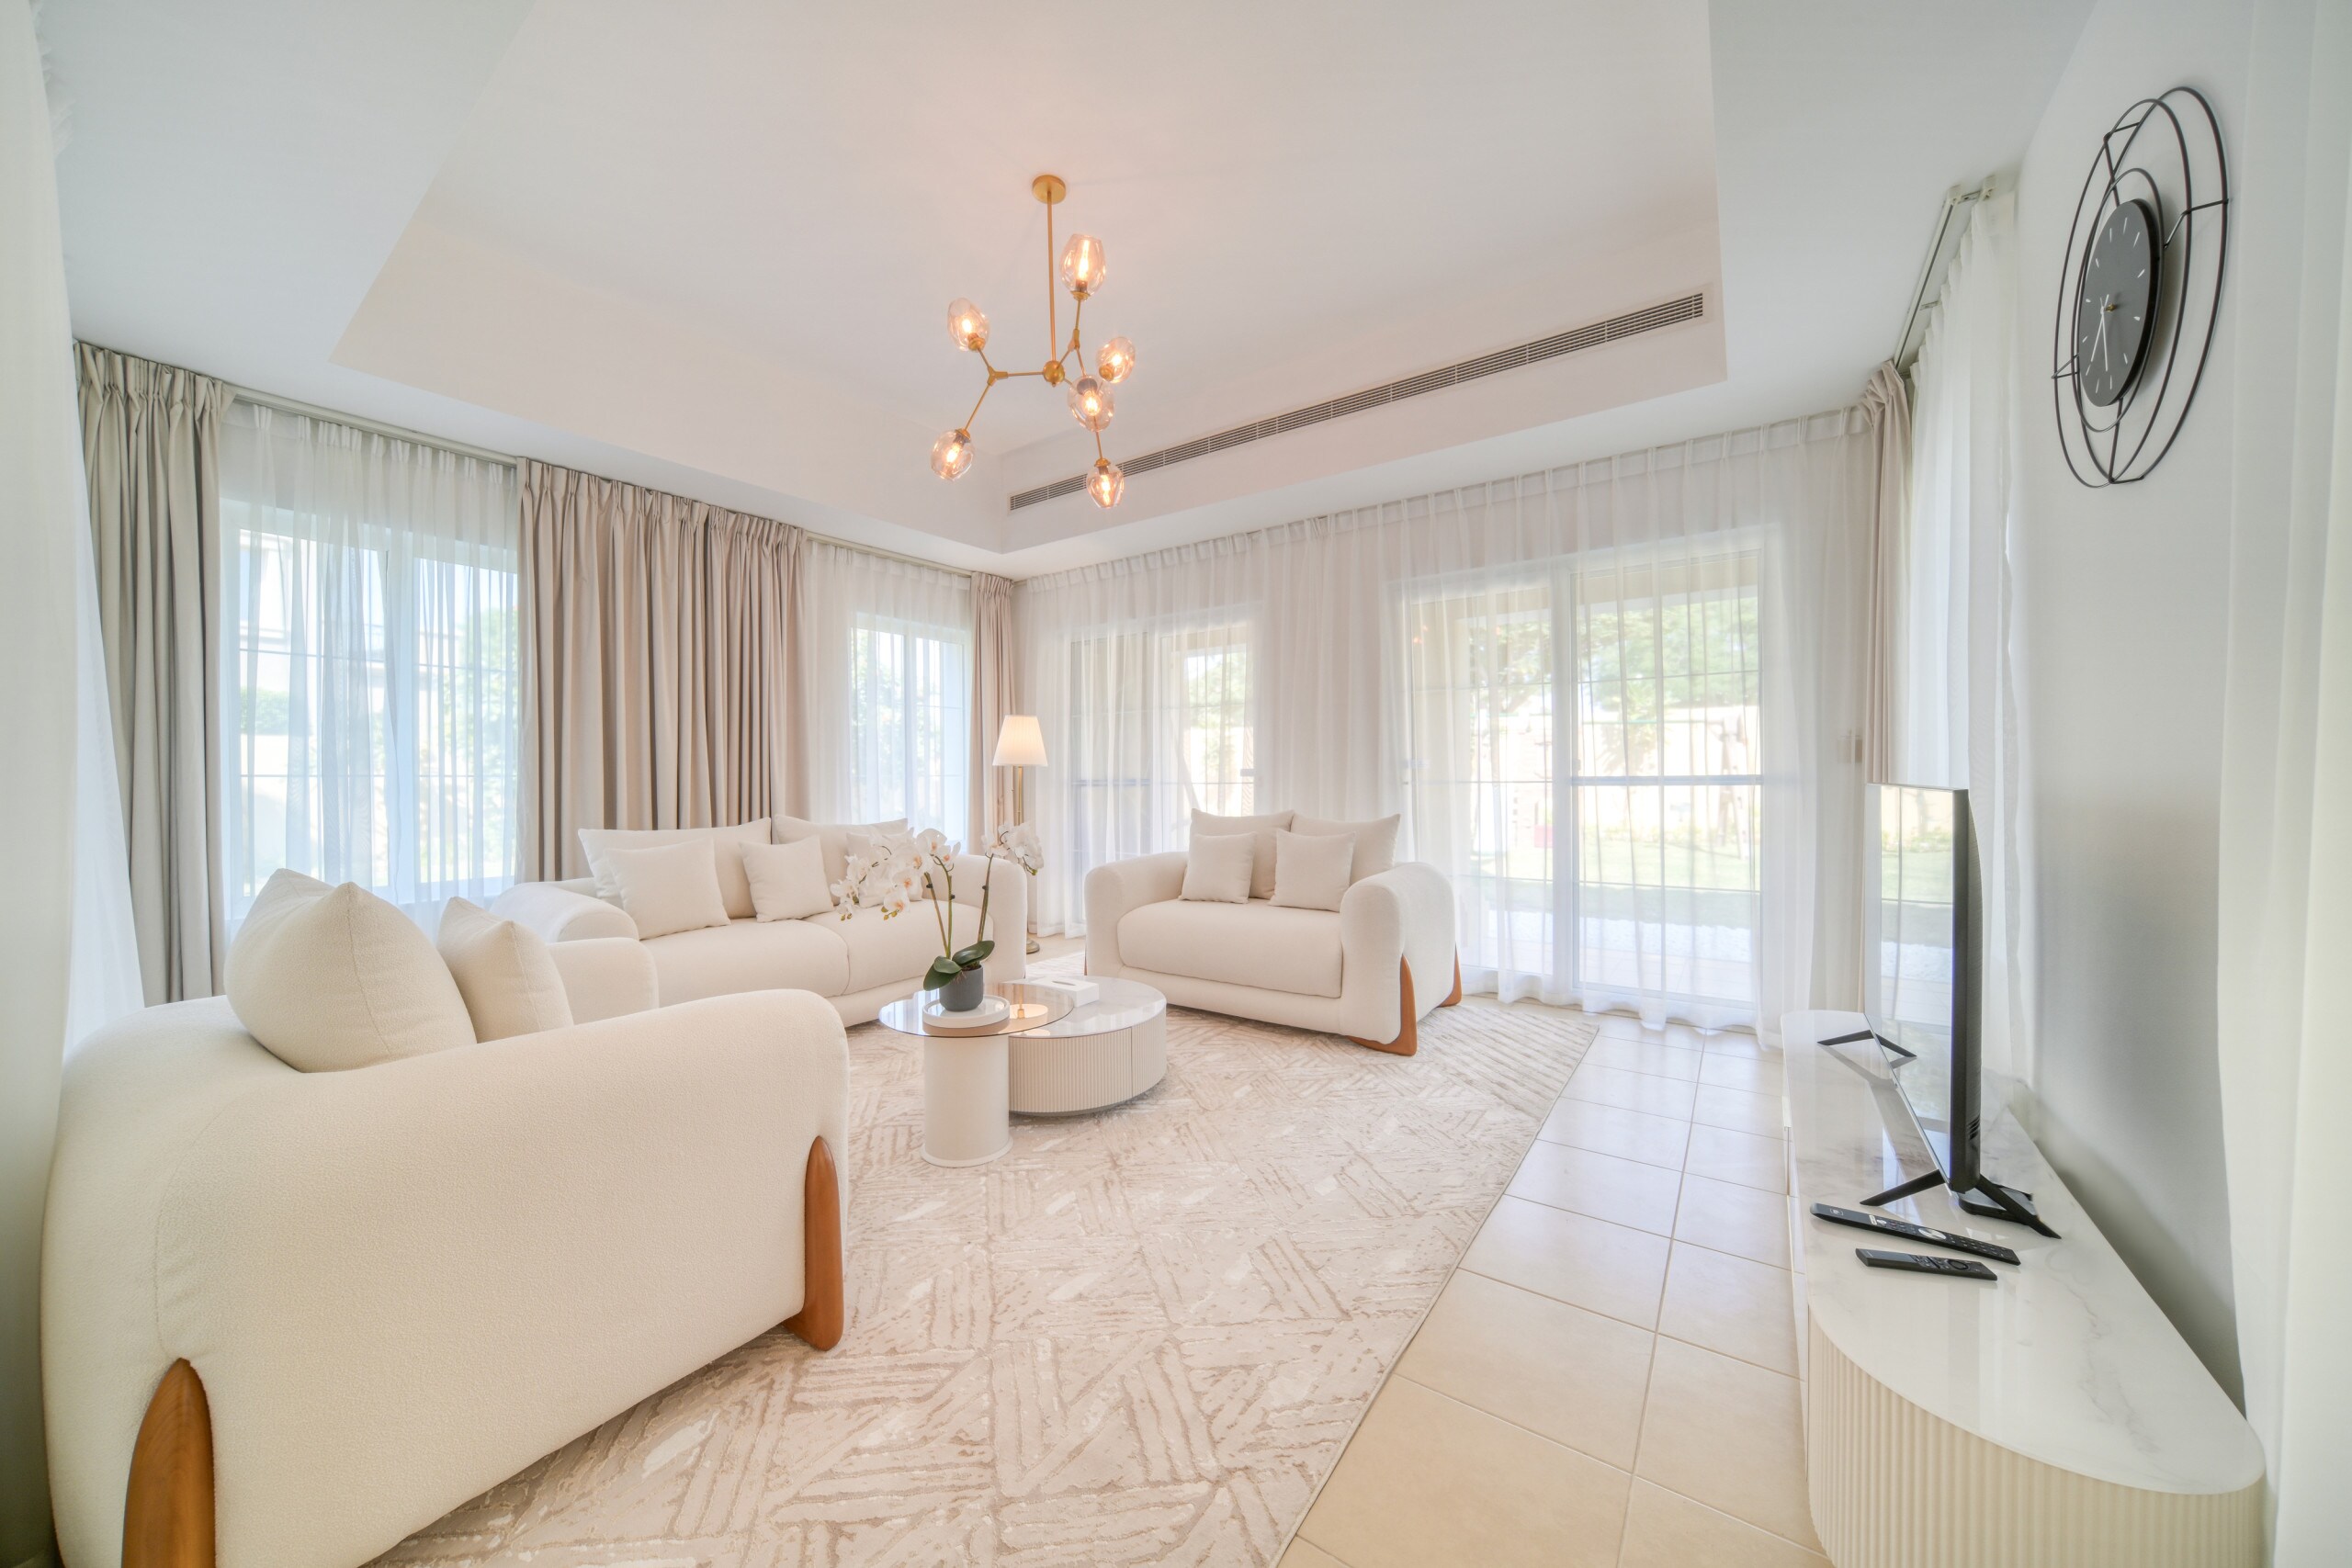 Property Image 1 - Luxury 3BR Villa with Assistant’s Room at Alvorada 4 Arabian Ranches